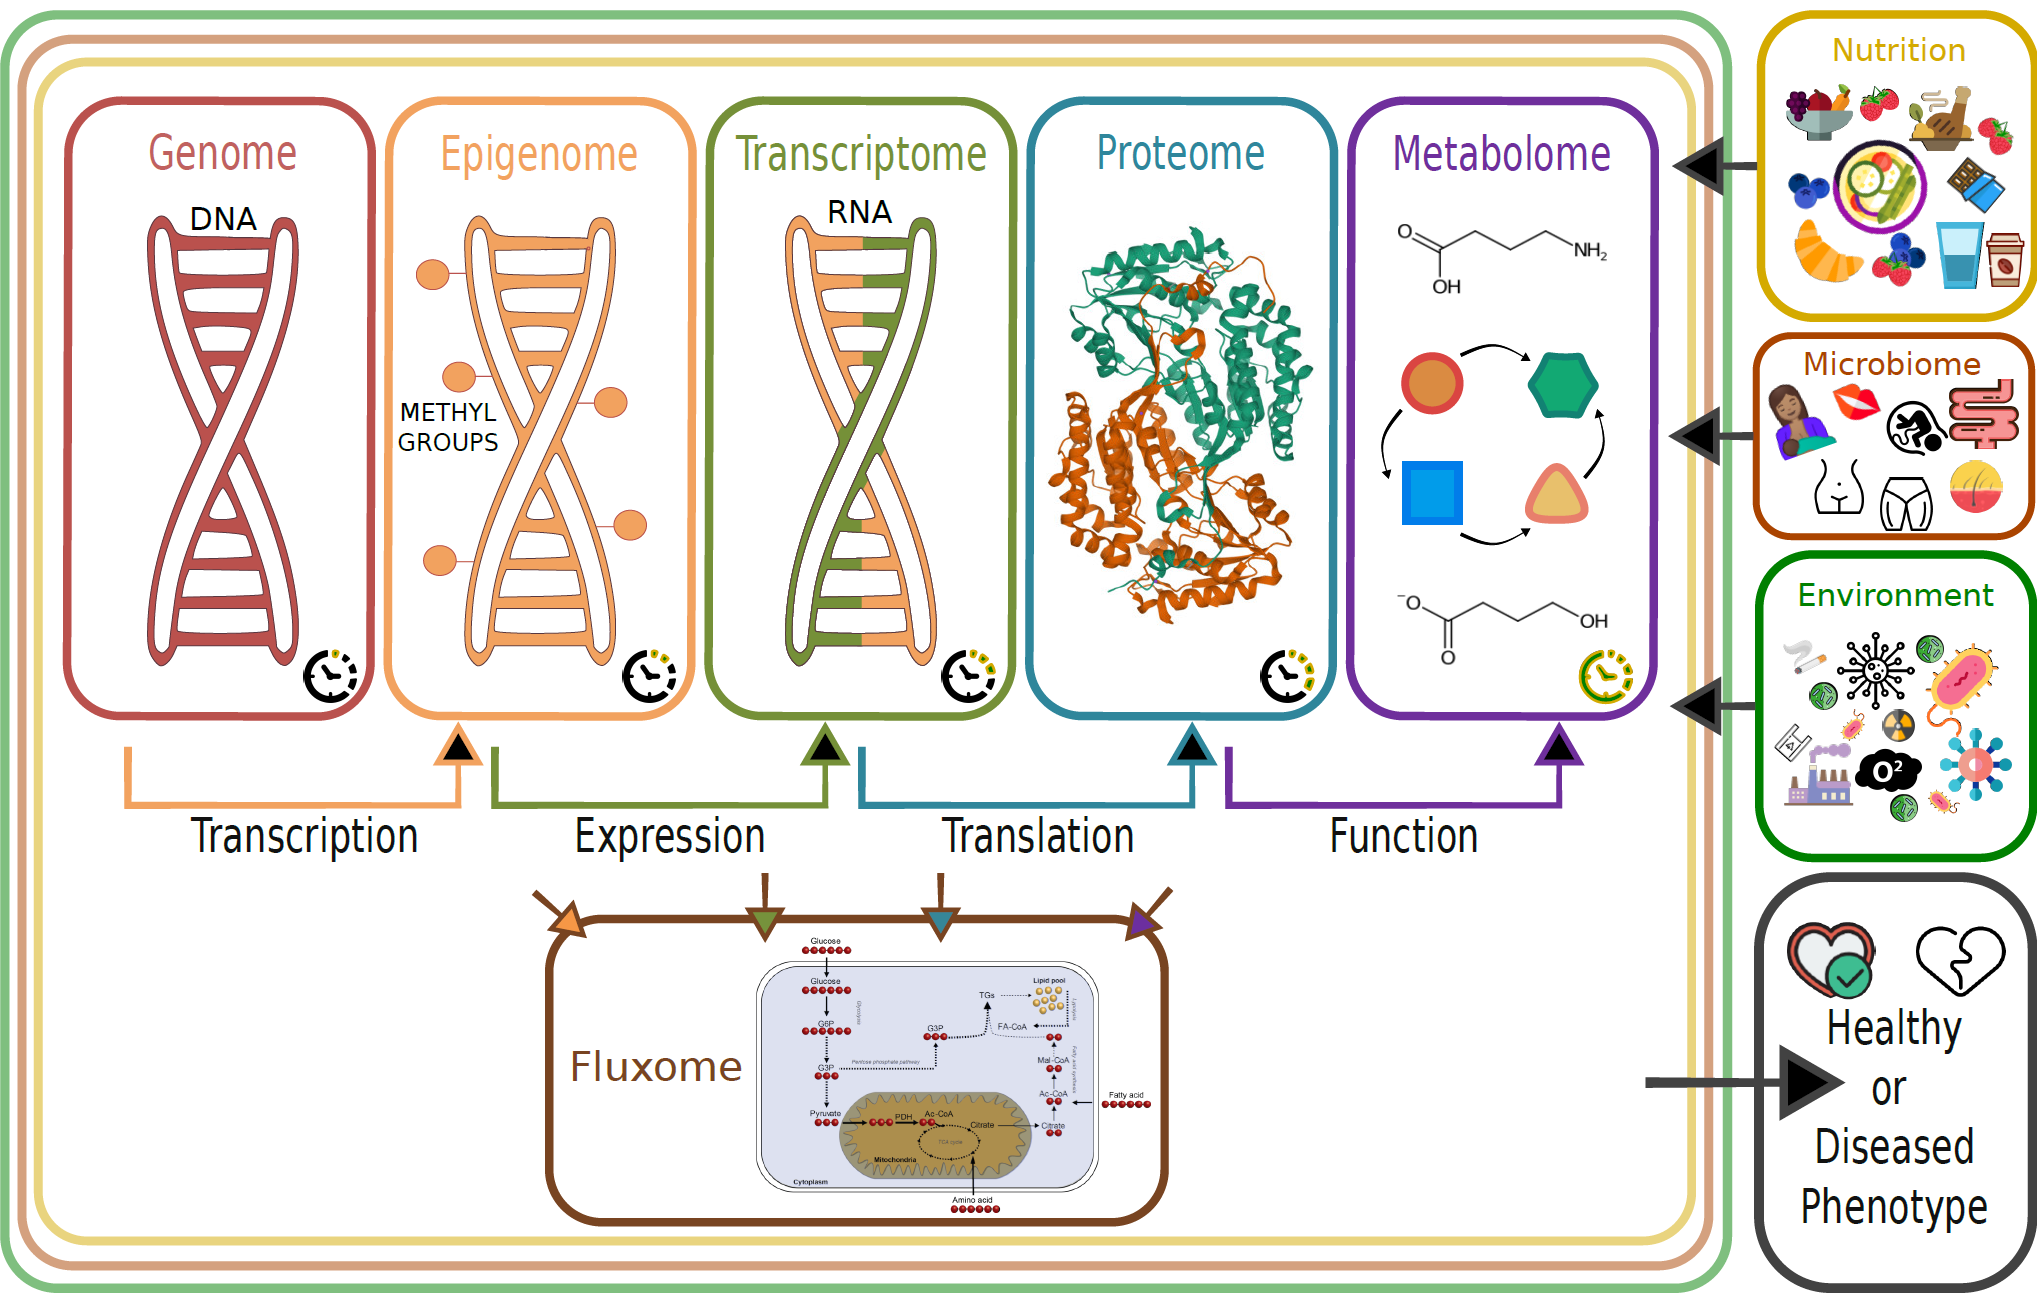 Diagram highlighting the relationships between internal factors (genome, epigenome, transcriptome, proteome, metabolome, and fluxome), external factors (nutrition and environment), and the microbiome; all contributing to either a healthy phenotype or to disease(s).